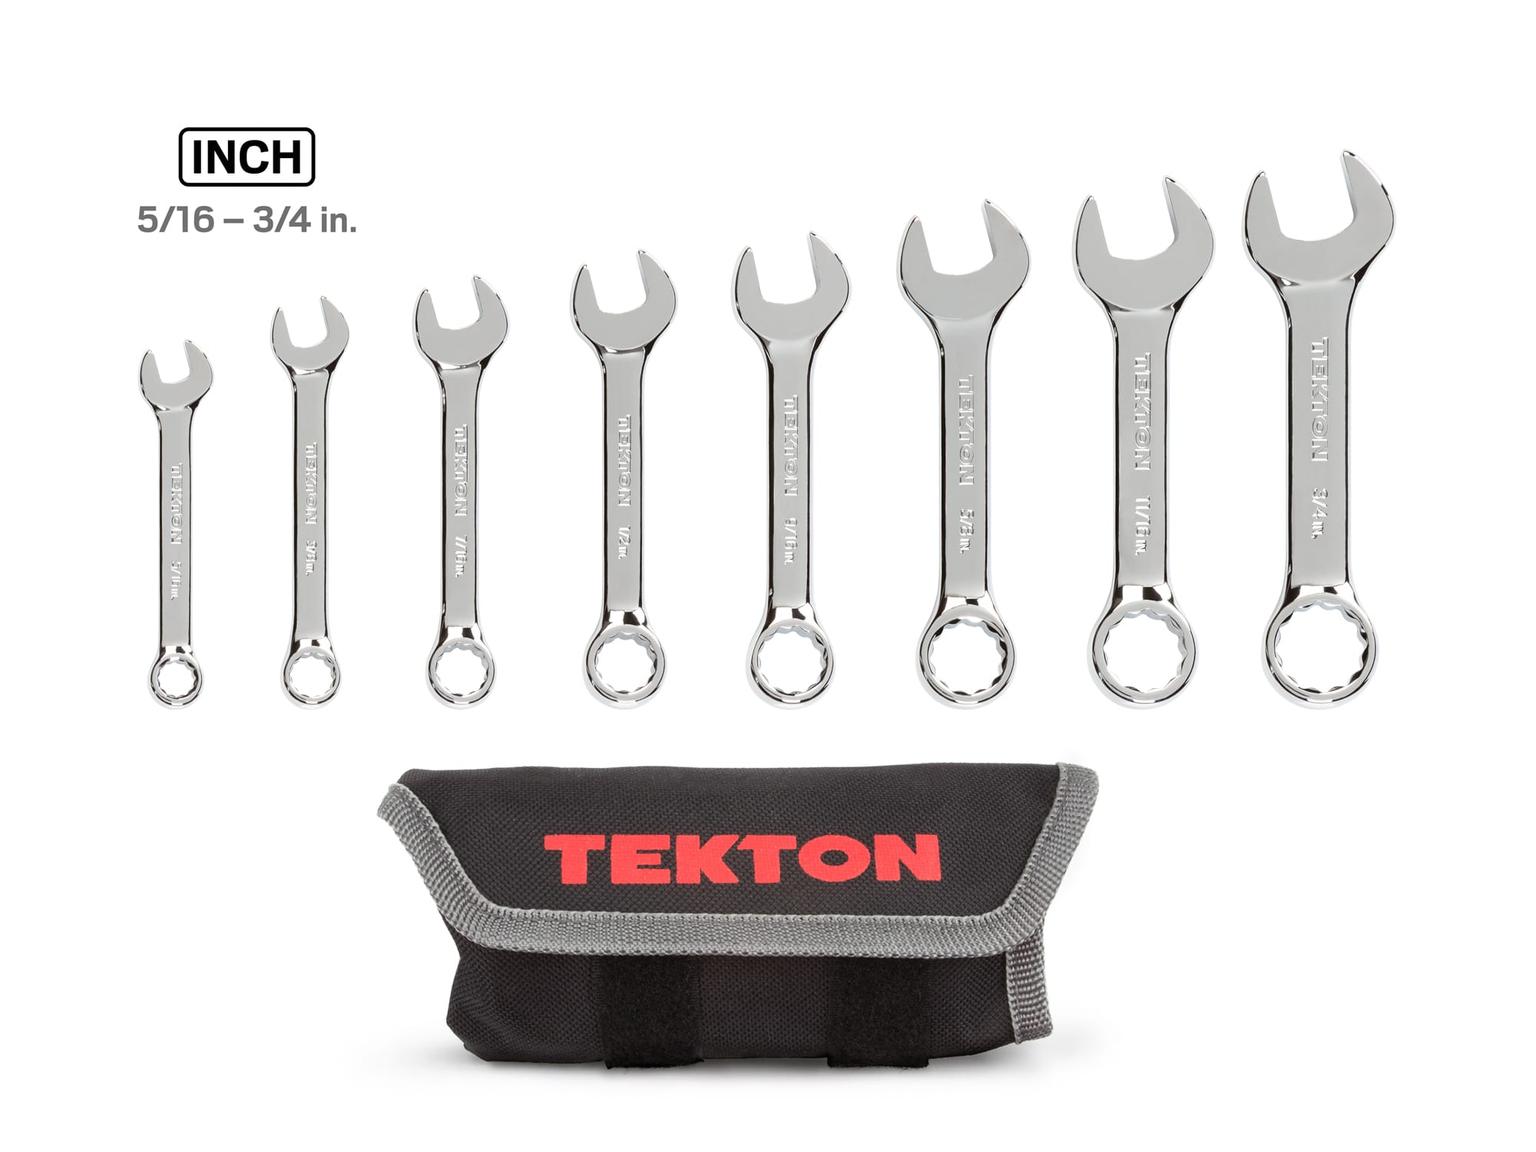 TEKTON WRN01086-T Stubby Combination Wrench Set with Pouch, 8-Piece (5/16 - 3/4 in.)